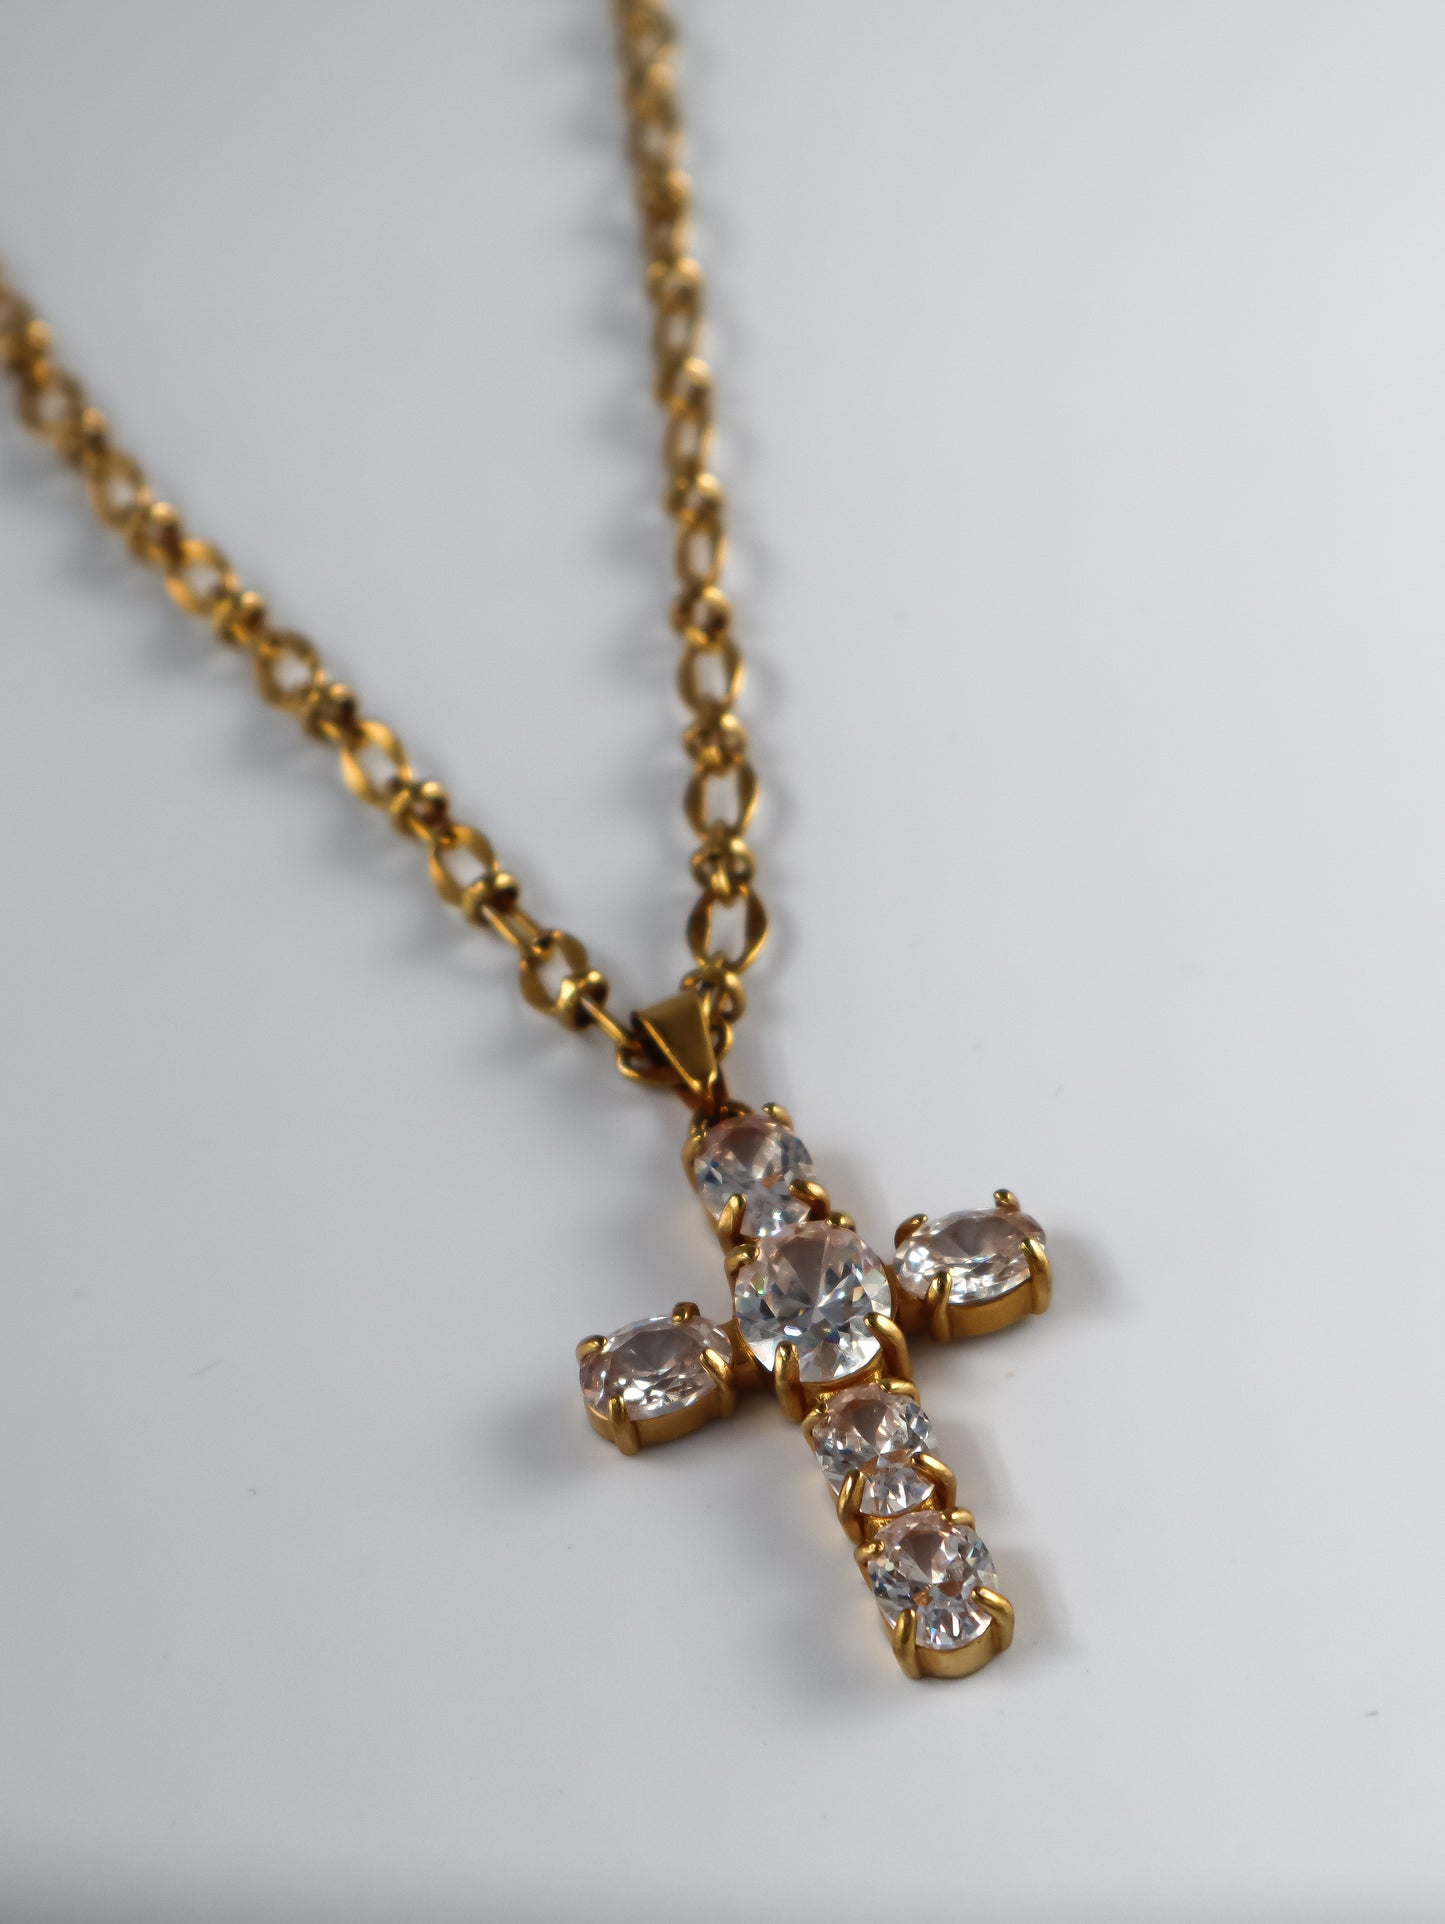 The Holy Necklace